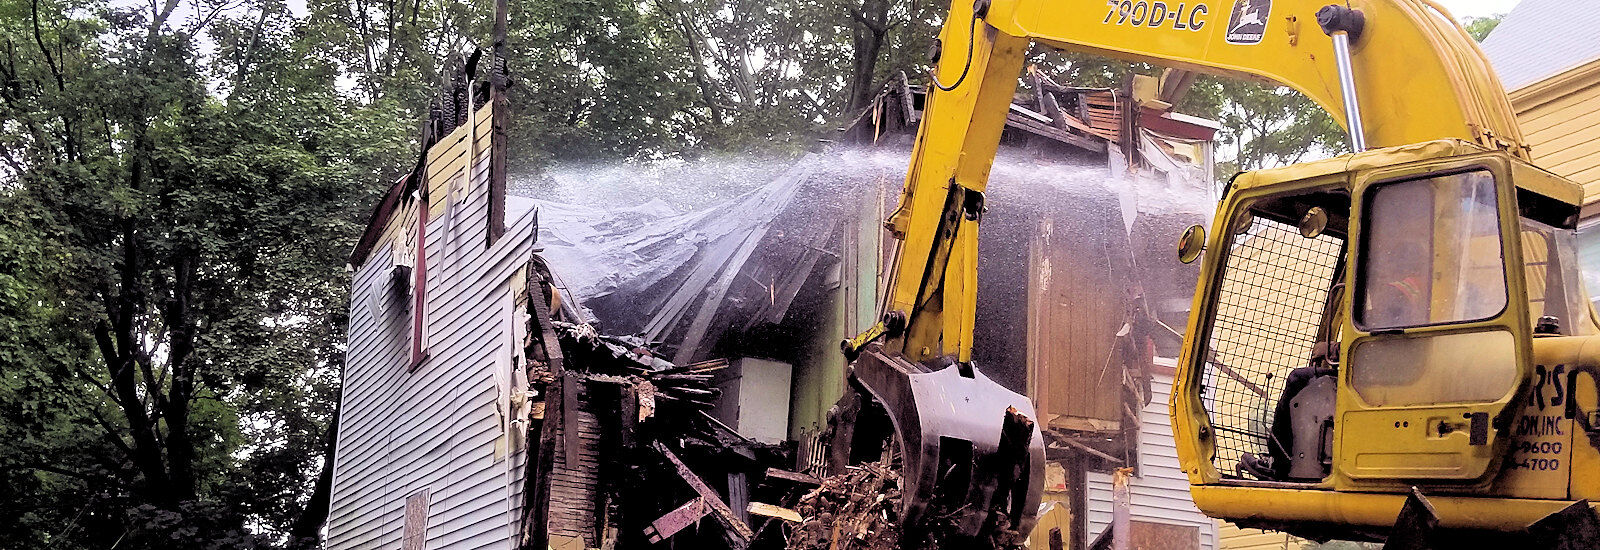 heavy machinery during a demolition